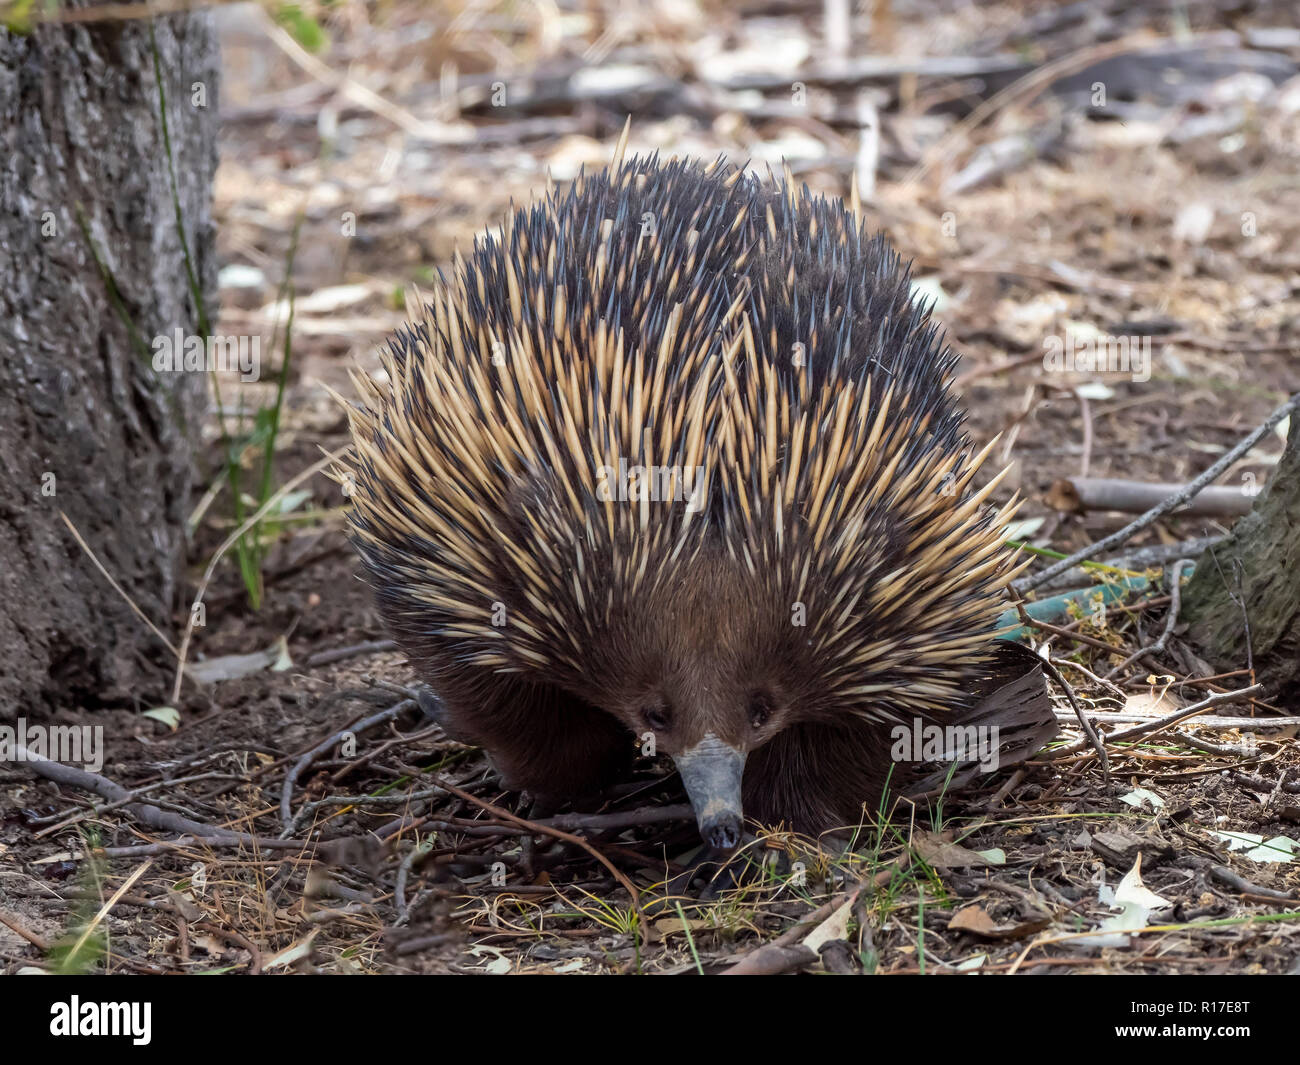 Short-beaked Echidna (Tachyglossus aculeatus) also known as a Spiny ...